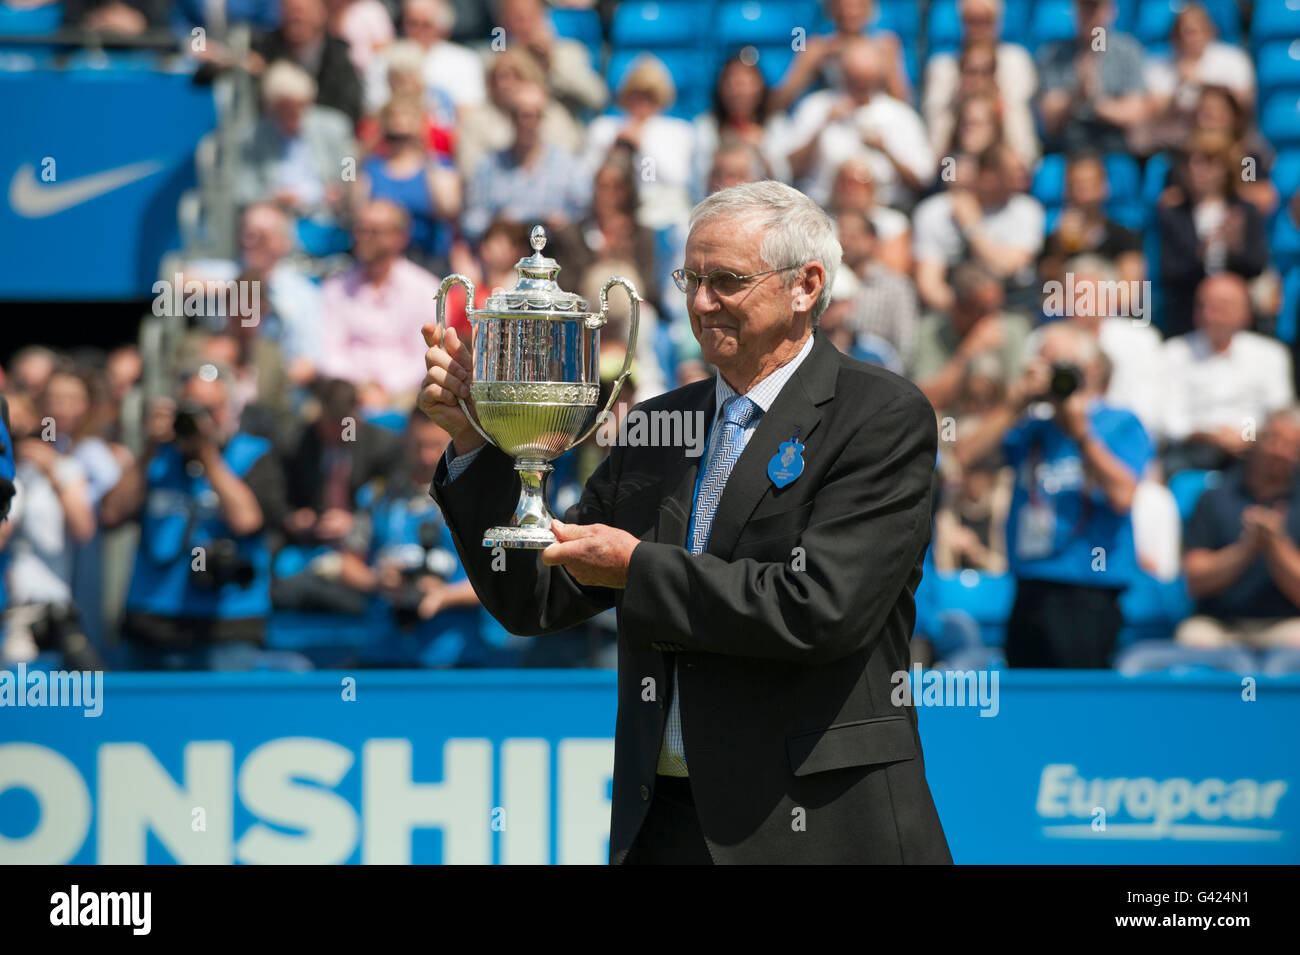 The Queen's Club, London UK. 17th June 2016. Day 5 of grass court  championships at the west London club, four-time champion Roy Emerson  presented with quarter size replica trophy. Credit: sportsimages/Alamy Live